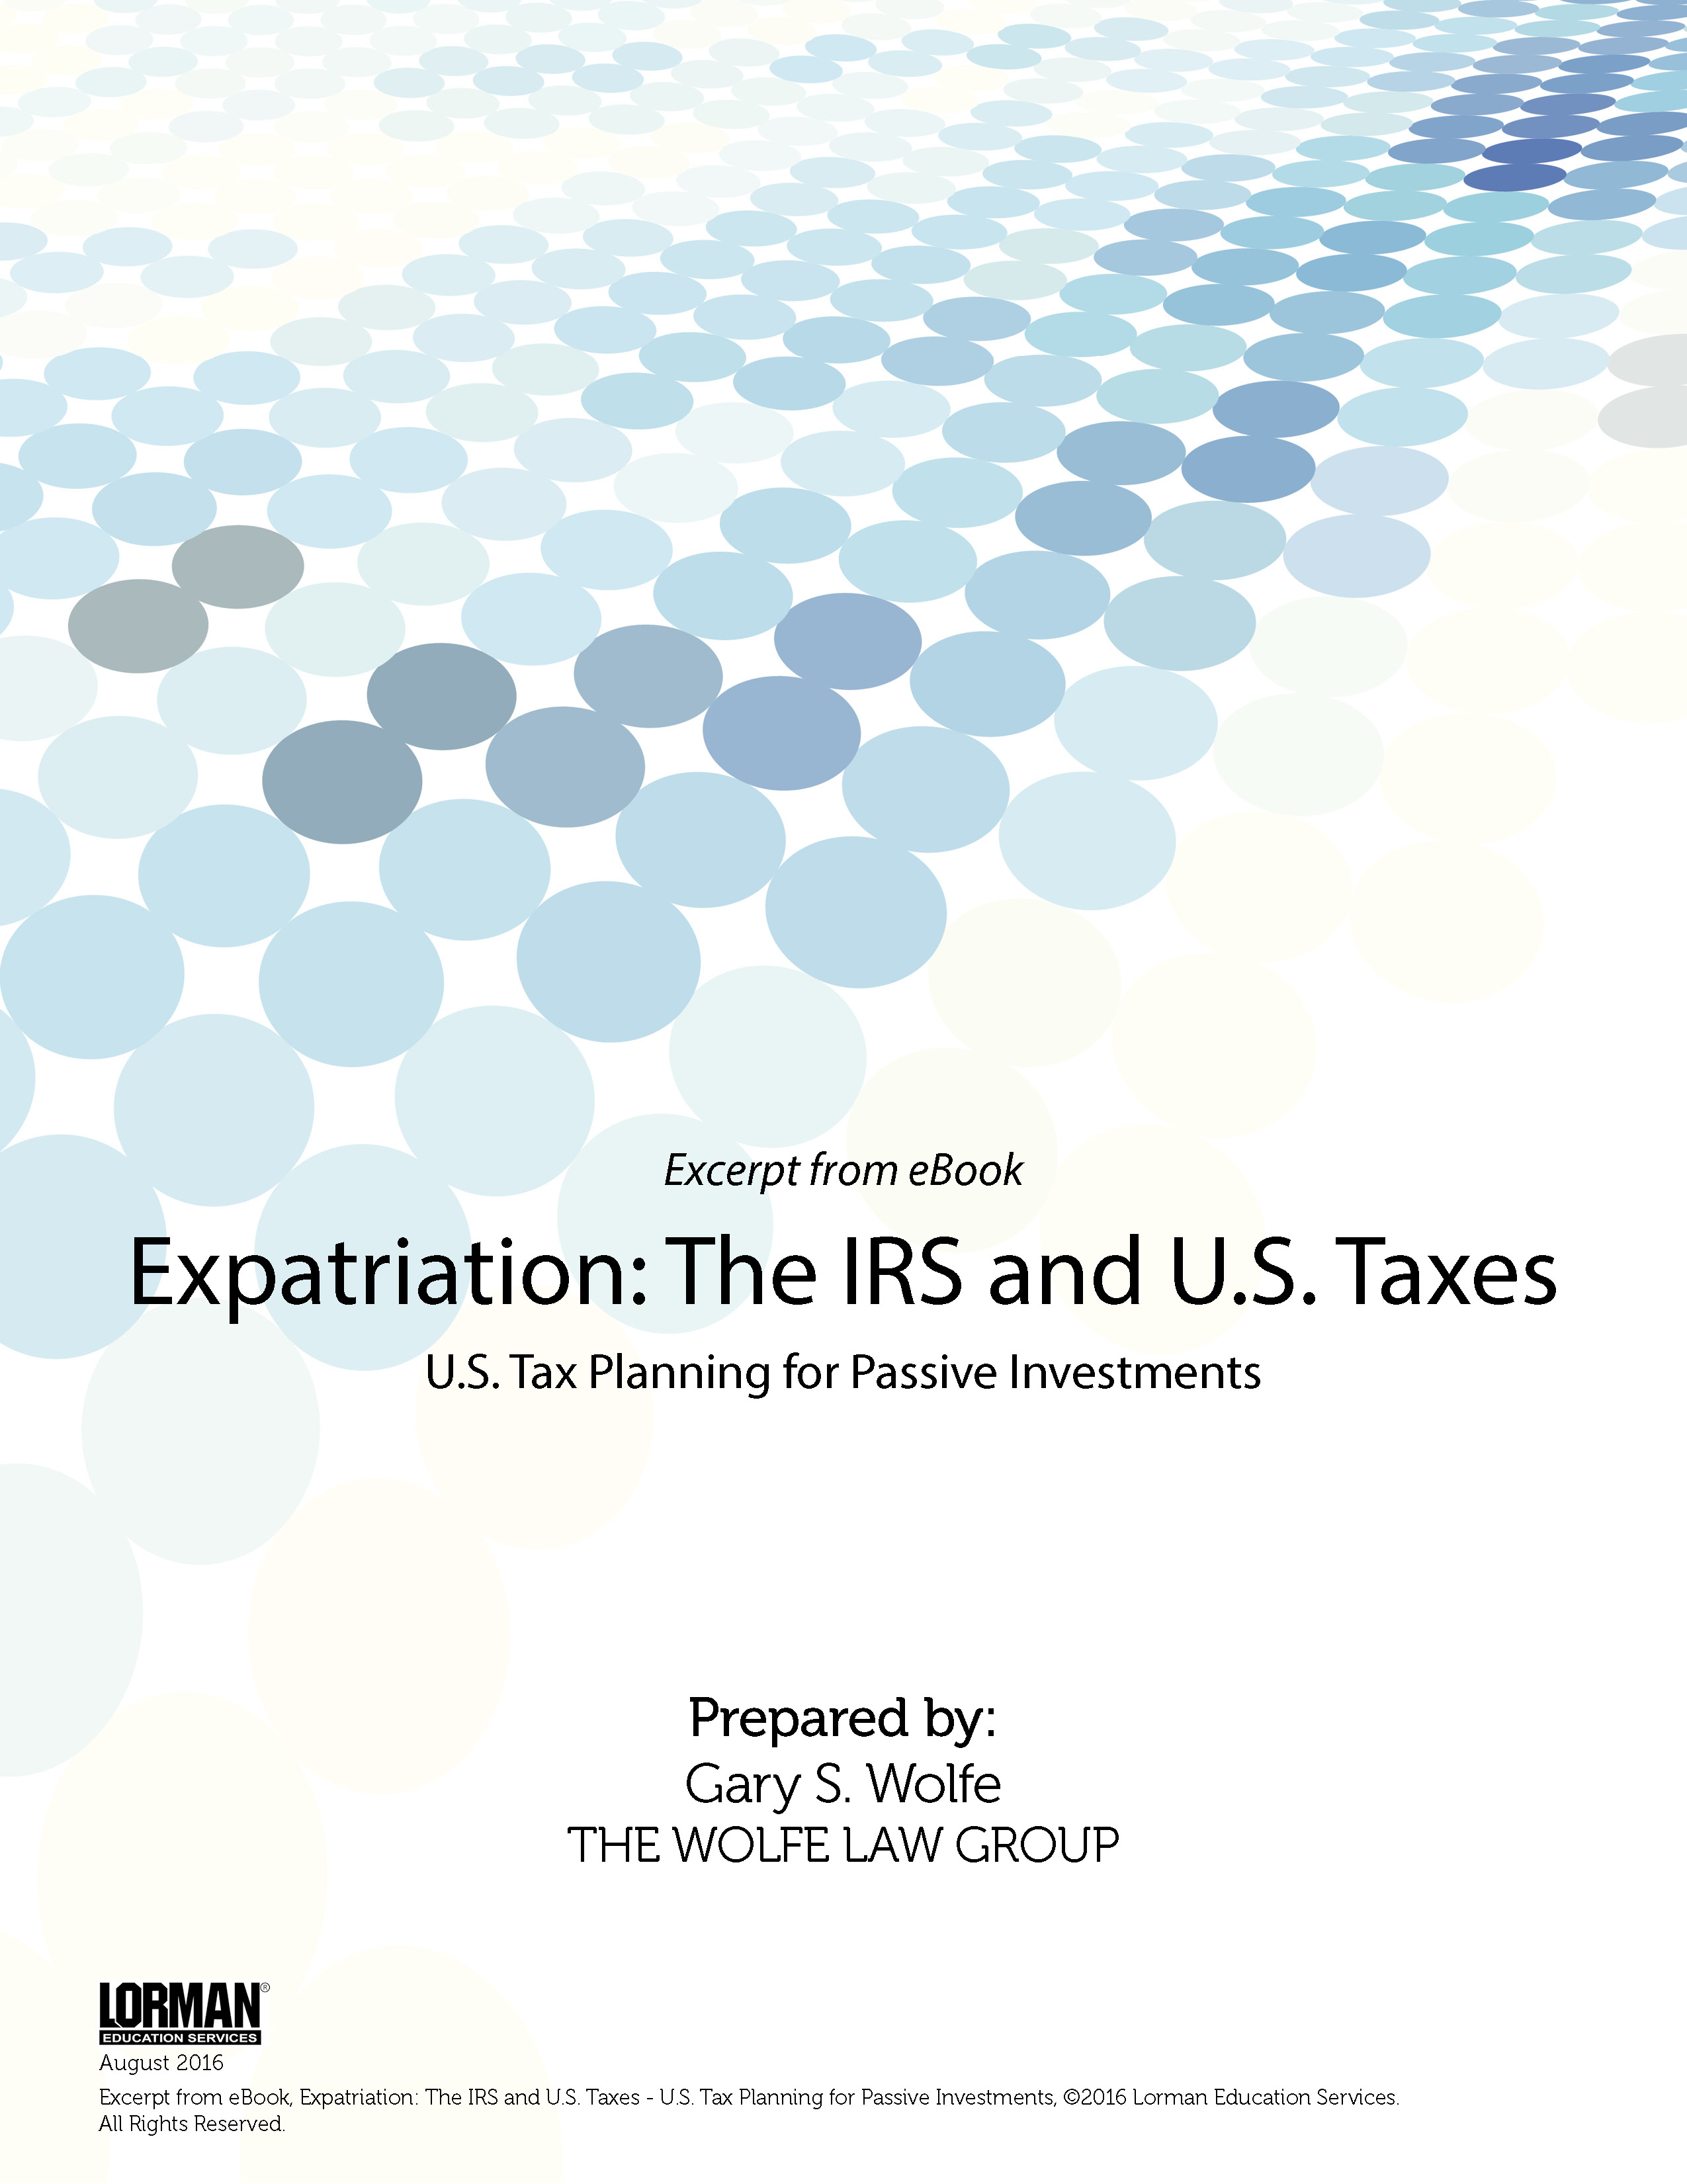 Expatriation - The IRS and U.S. Taxes - U.S. Tax Planning for Passive Investments